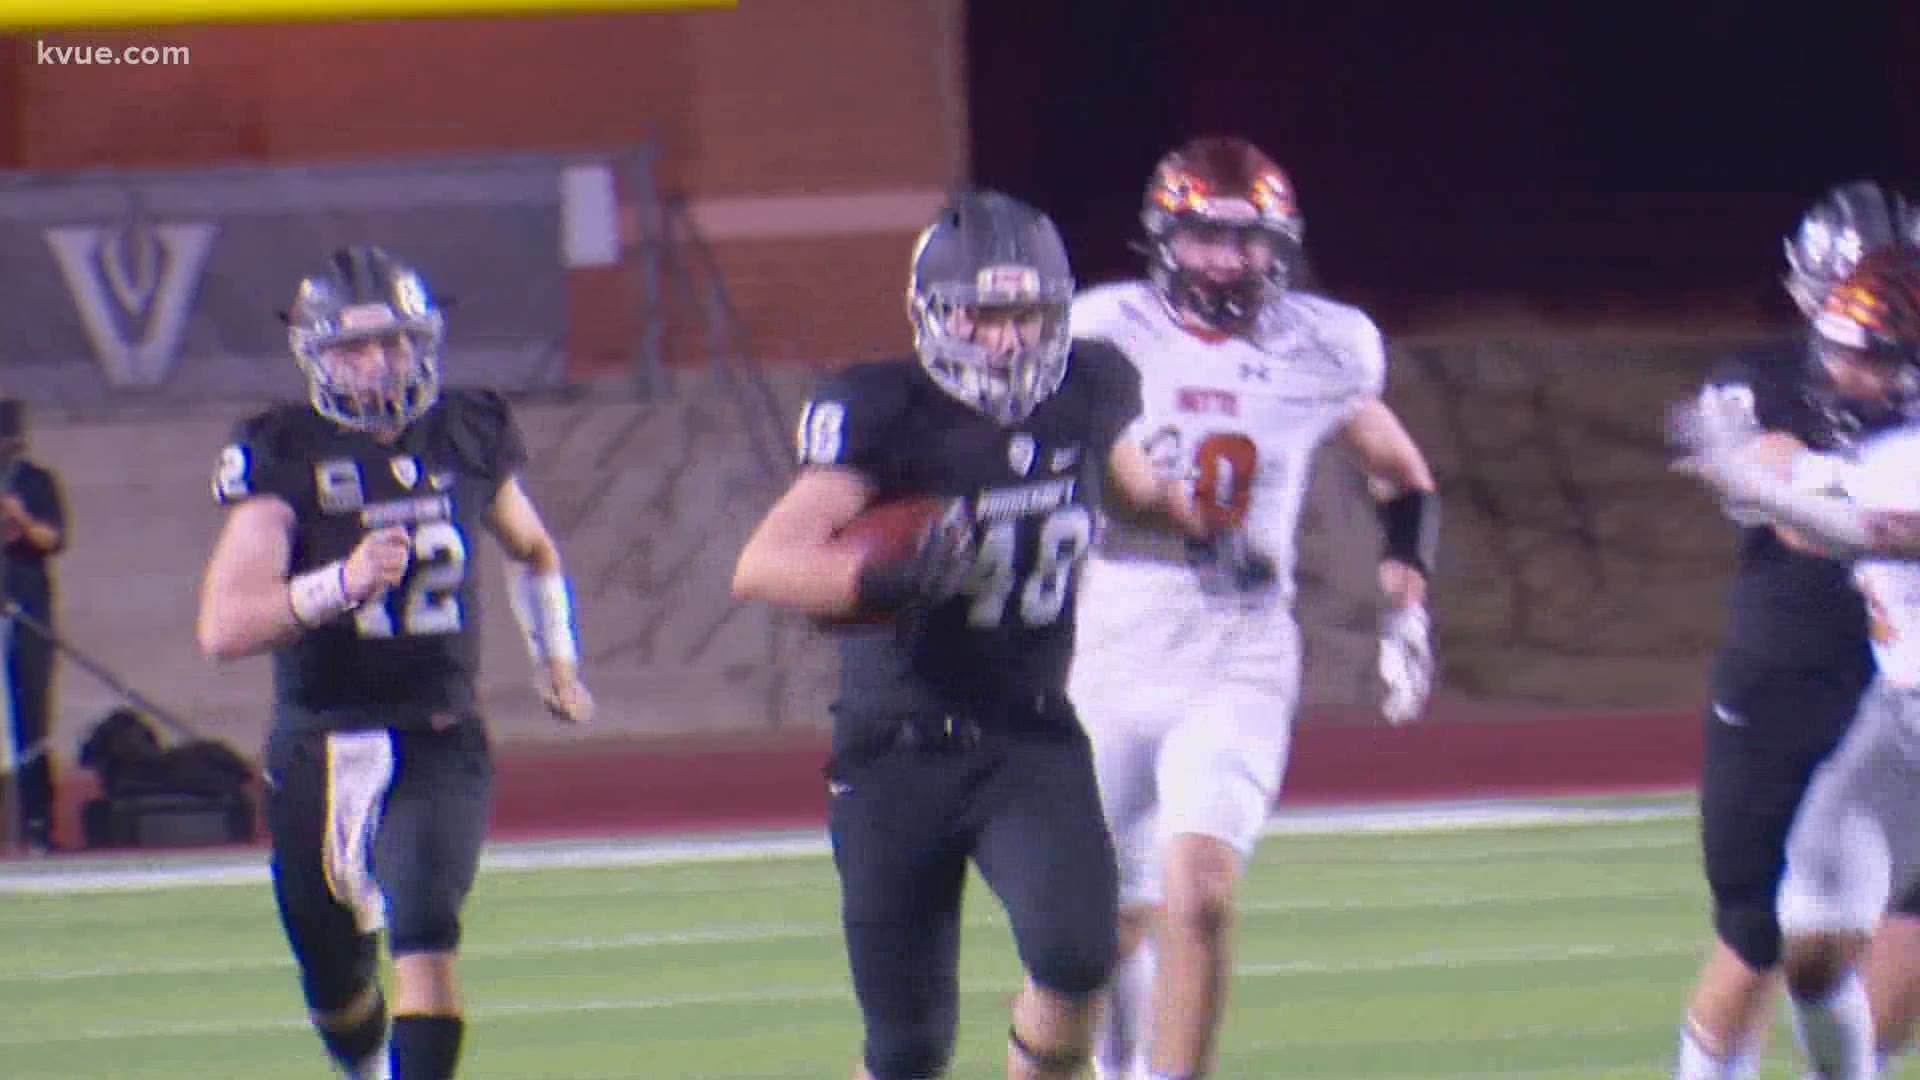 Vandegrift running back Tommy Hartman won this week's Big Save of the Week contest in a landslide.